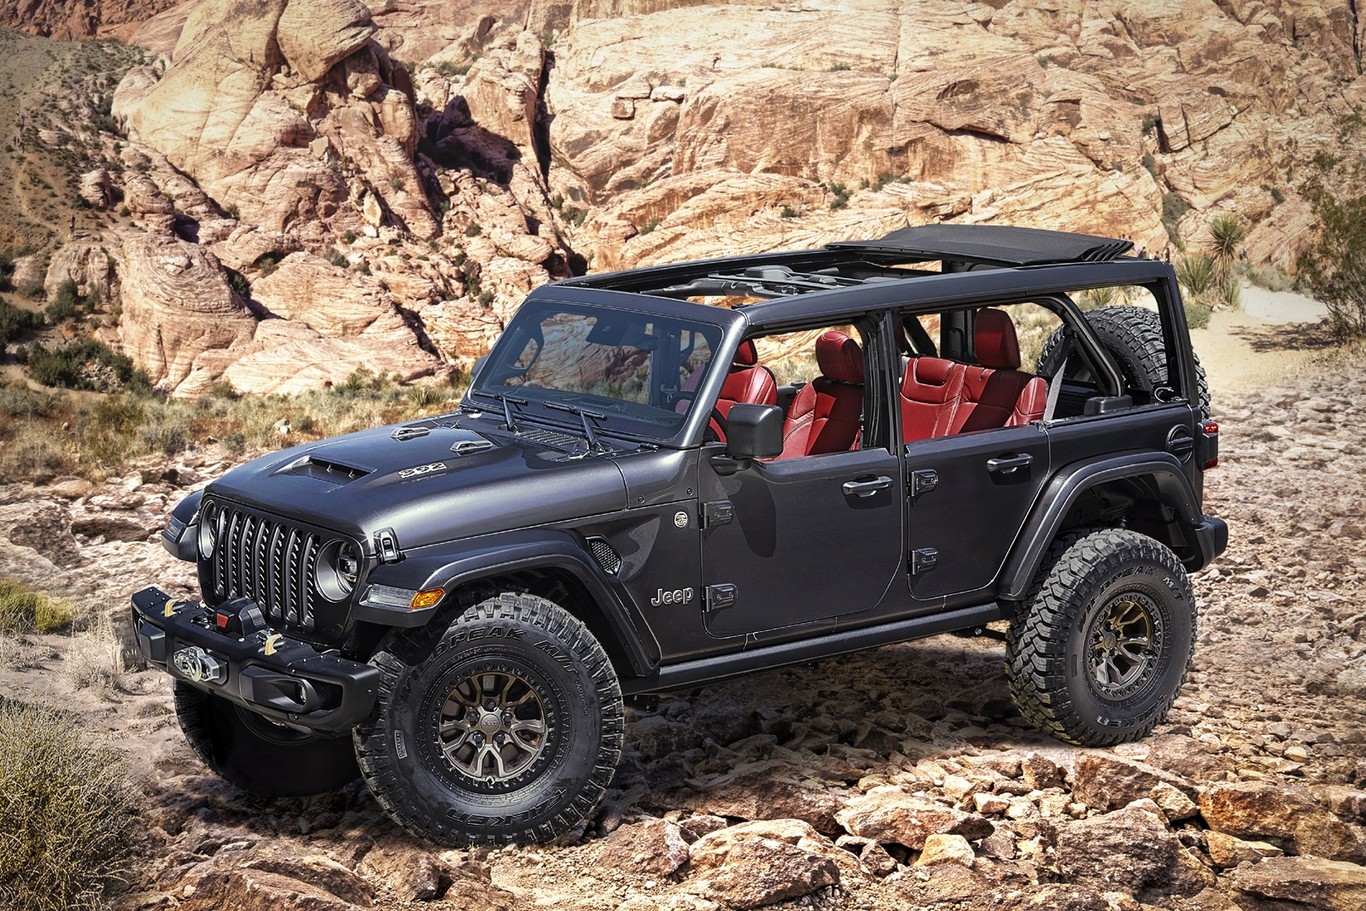 Drivers Want Used Jeep Wrangler Models the Most